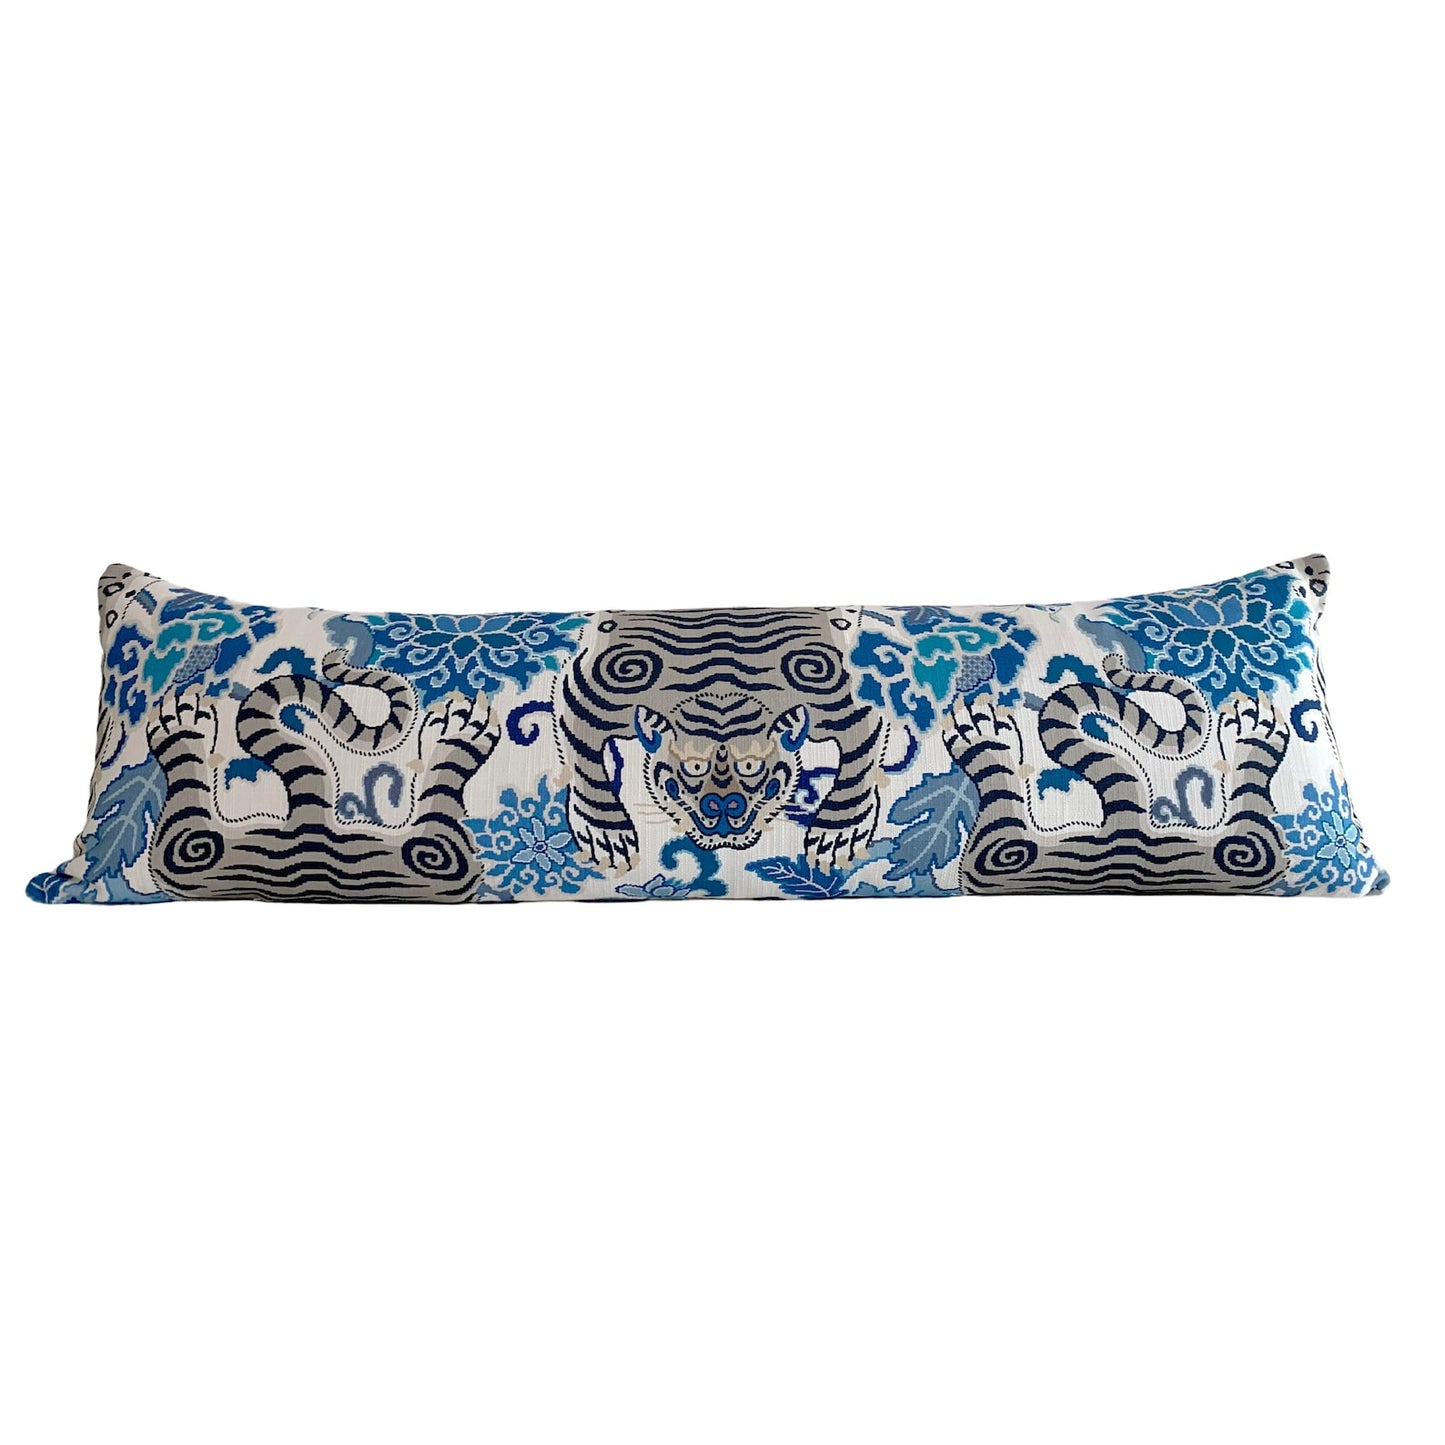 Blue Mystique Tibet Tiger Pillow Cover - Tiger Pillow Cover - Tiger Skin Motif  - Available in Bolster, Lumbar, Throw, Euro Sizes